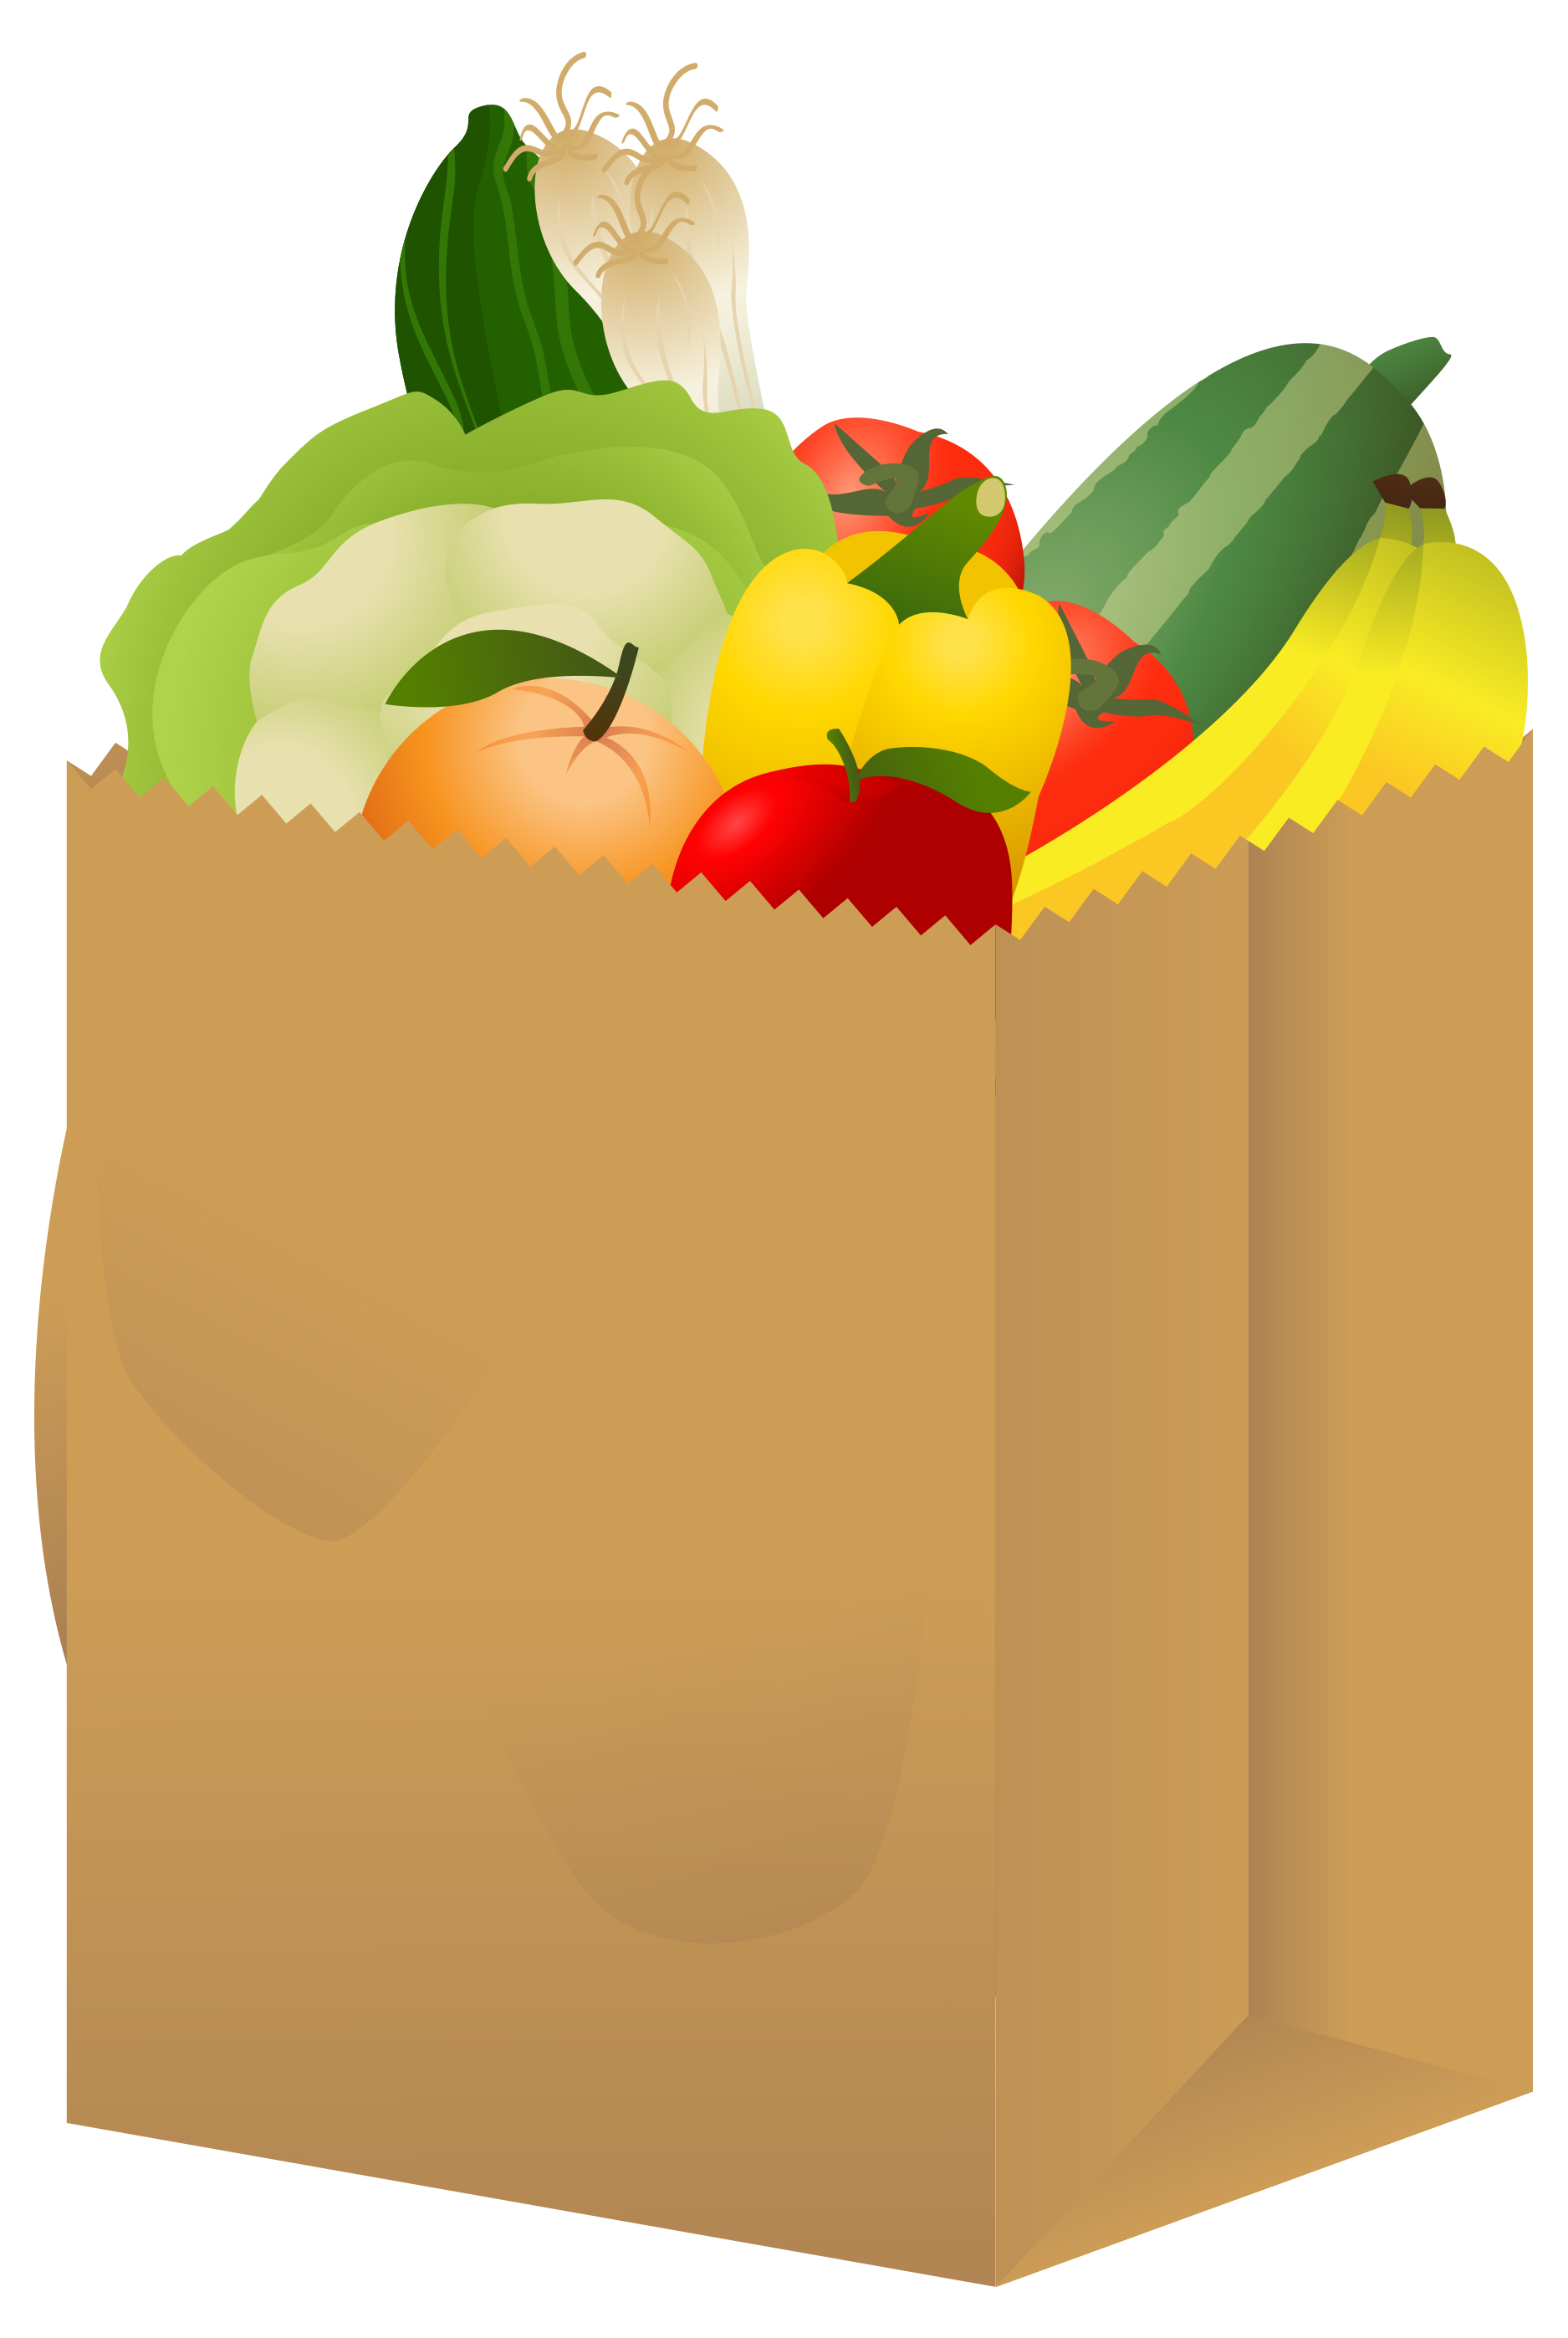 Bag Of Food Clipart.